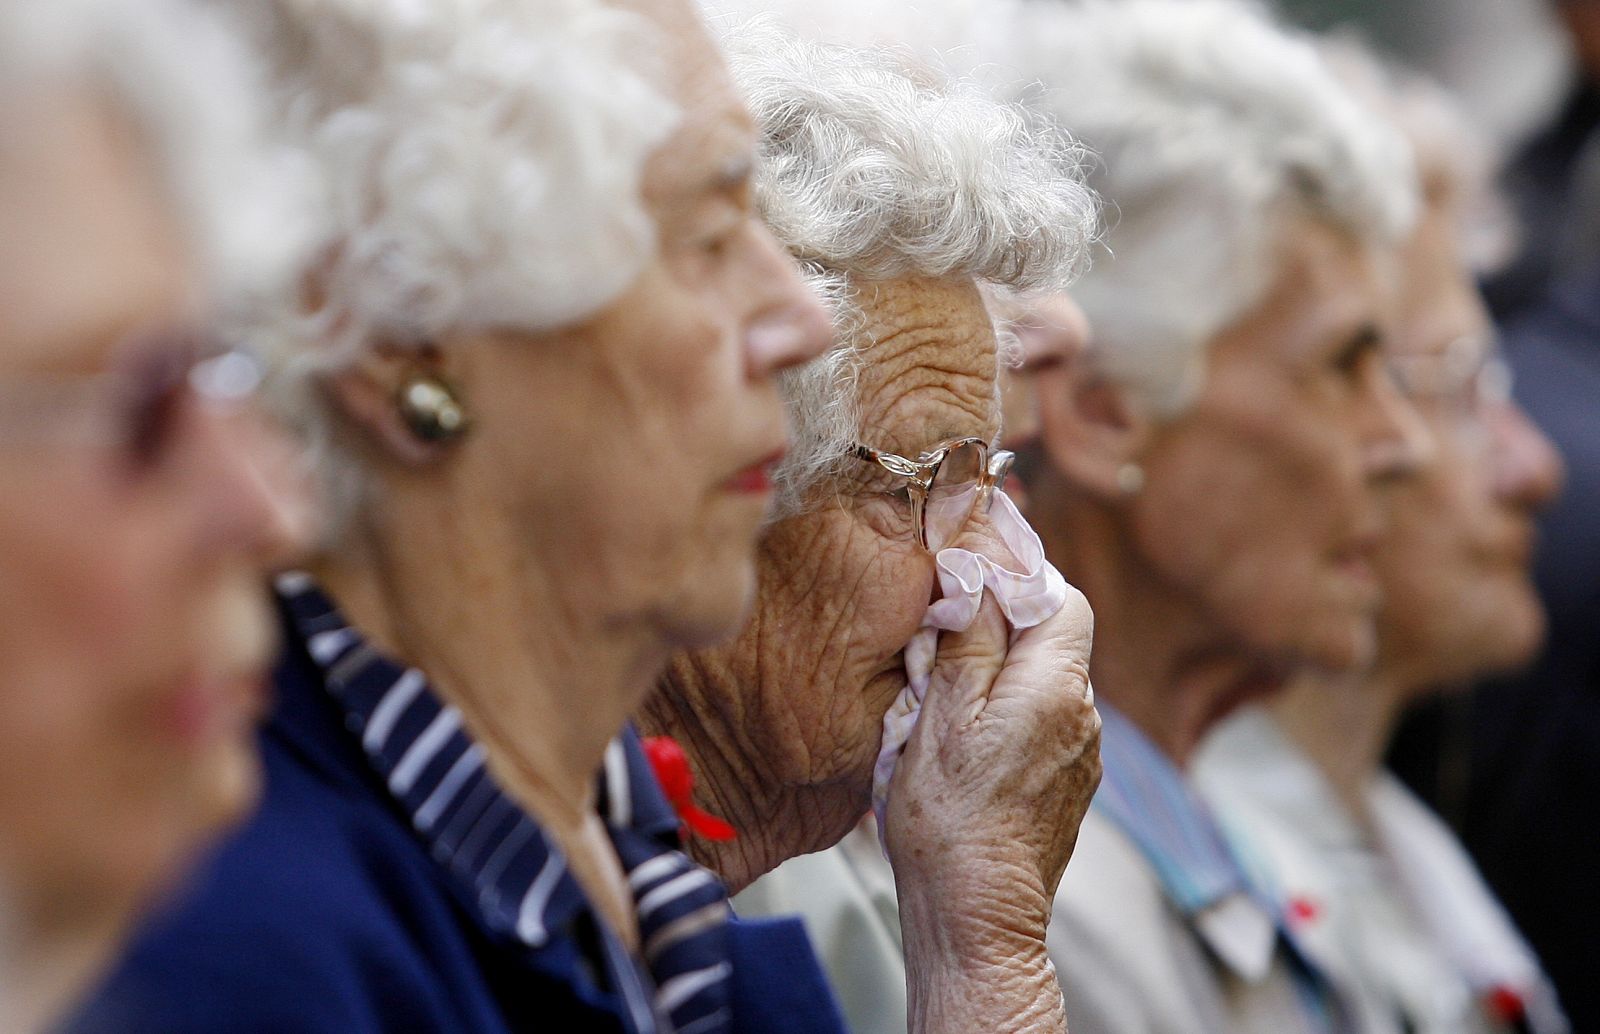 Women attend an Armistice Day ceremony at the Cenotaph in Sydney